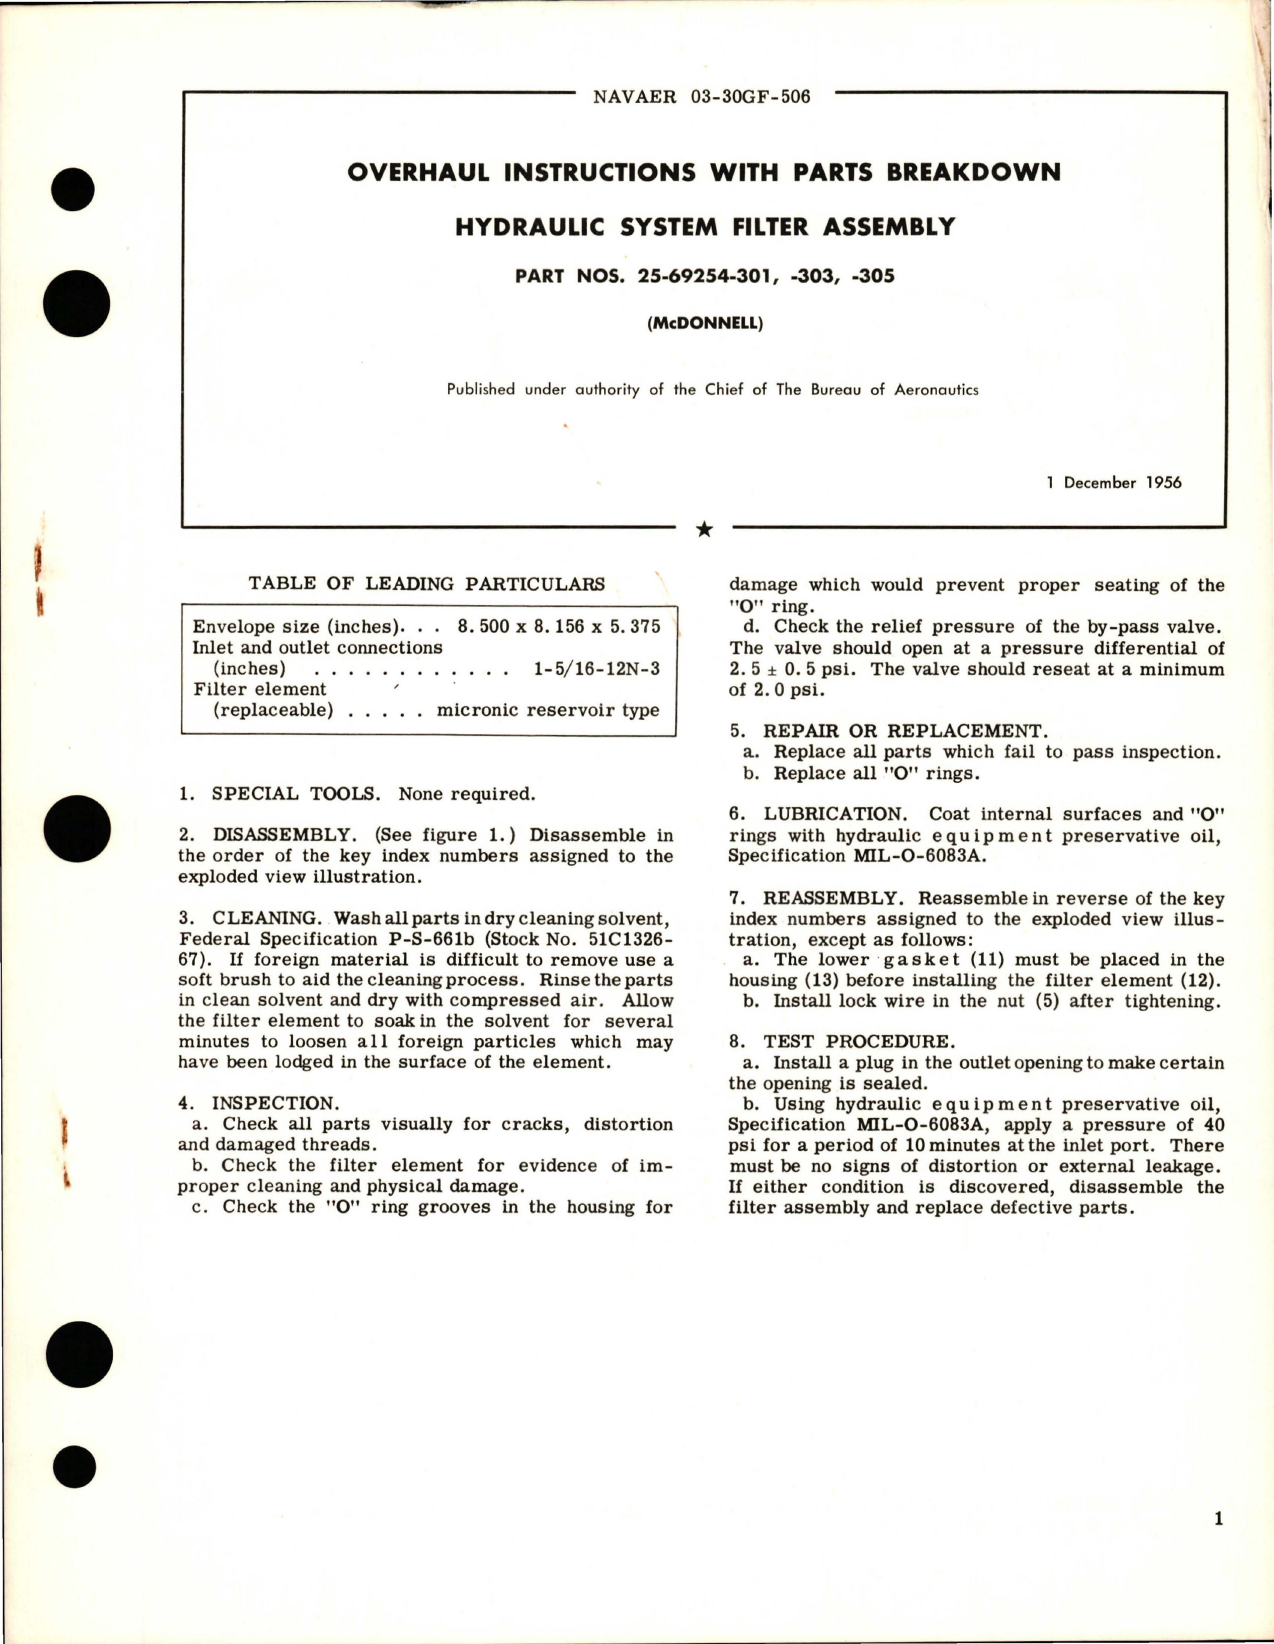 Sample page 1 from AirCorps Library document: Overhaul Instructions with Parts Breakdown for Hydraulic System Filter Assembly - Parts 25-69254-301, 25-69254-303, and 25-69254-305